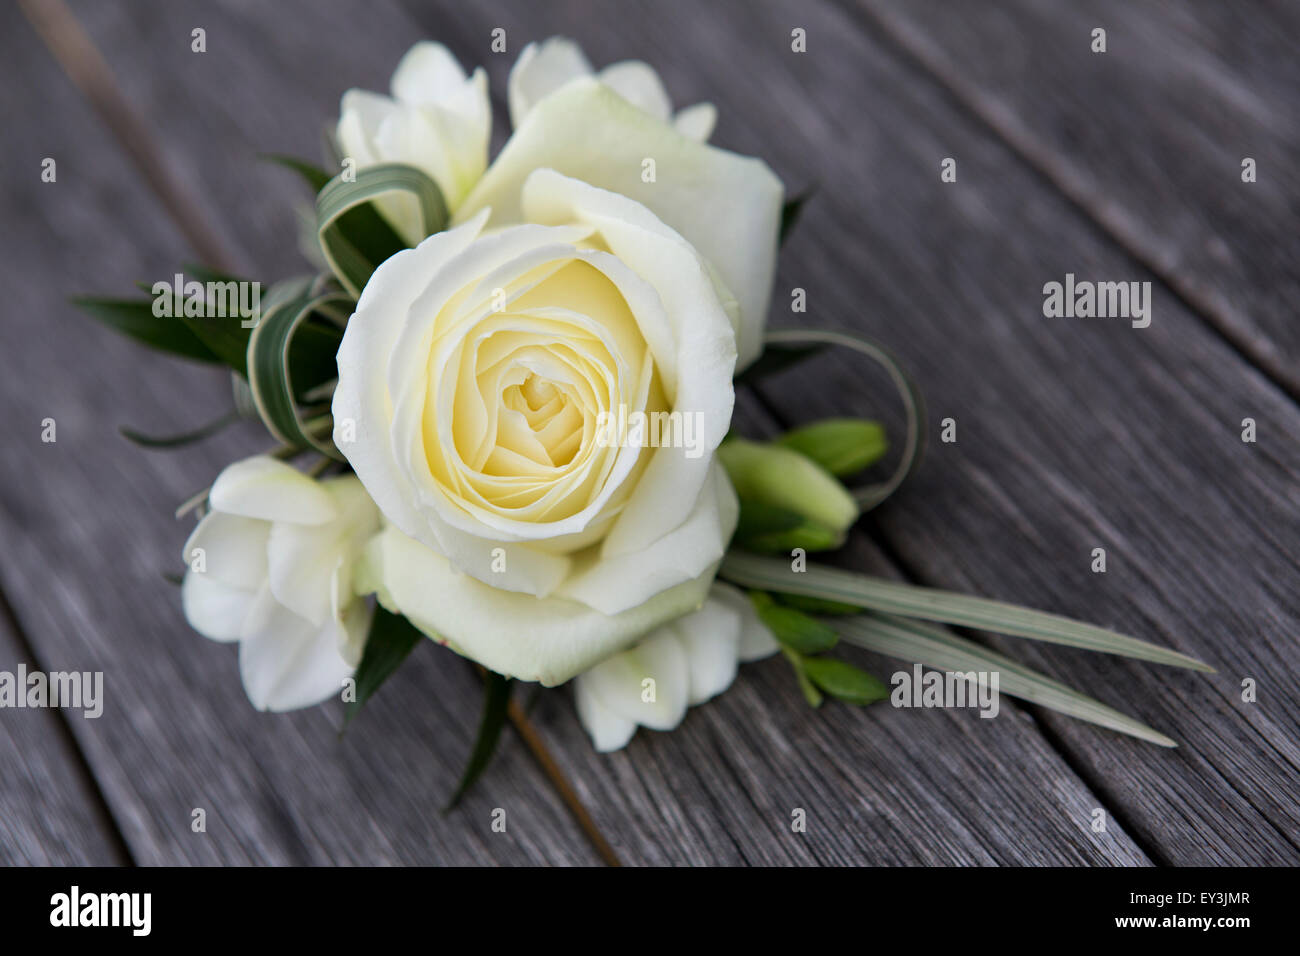 A boutonniere, button hole flower, a cream rose. Stock Photo